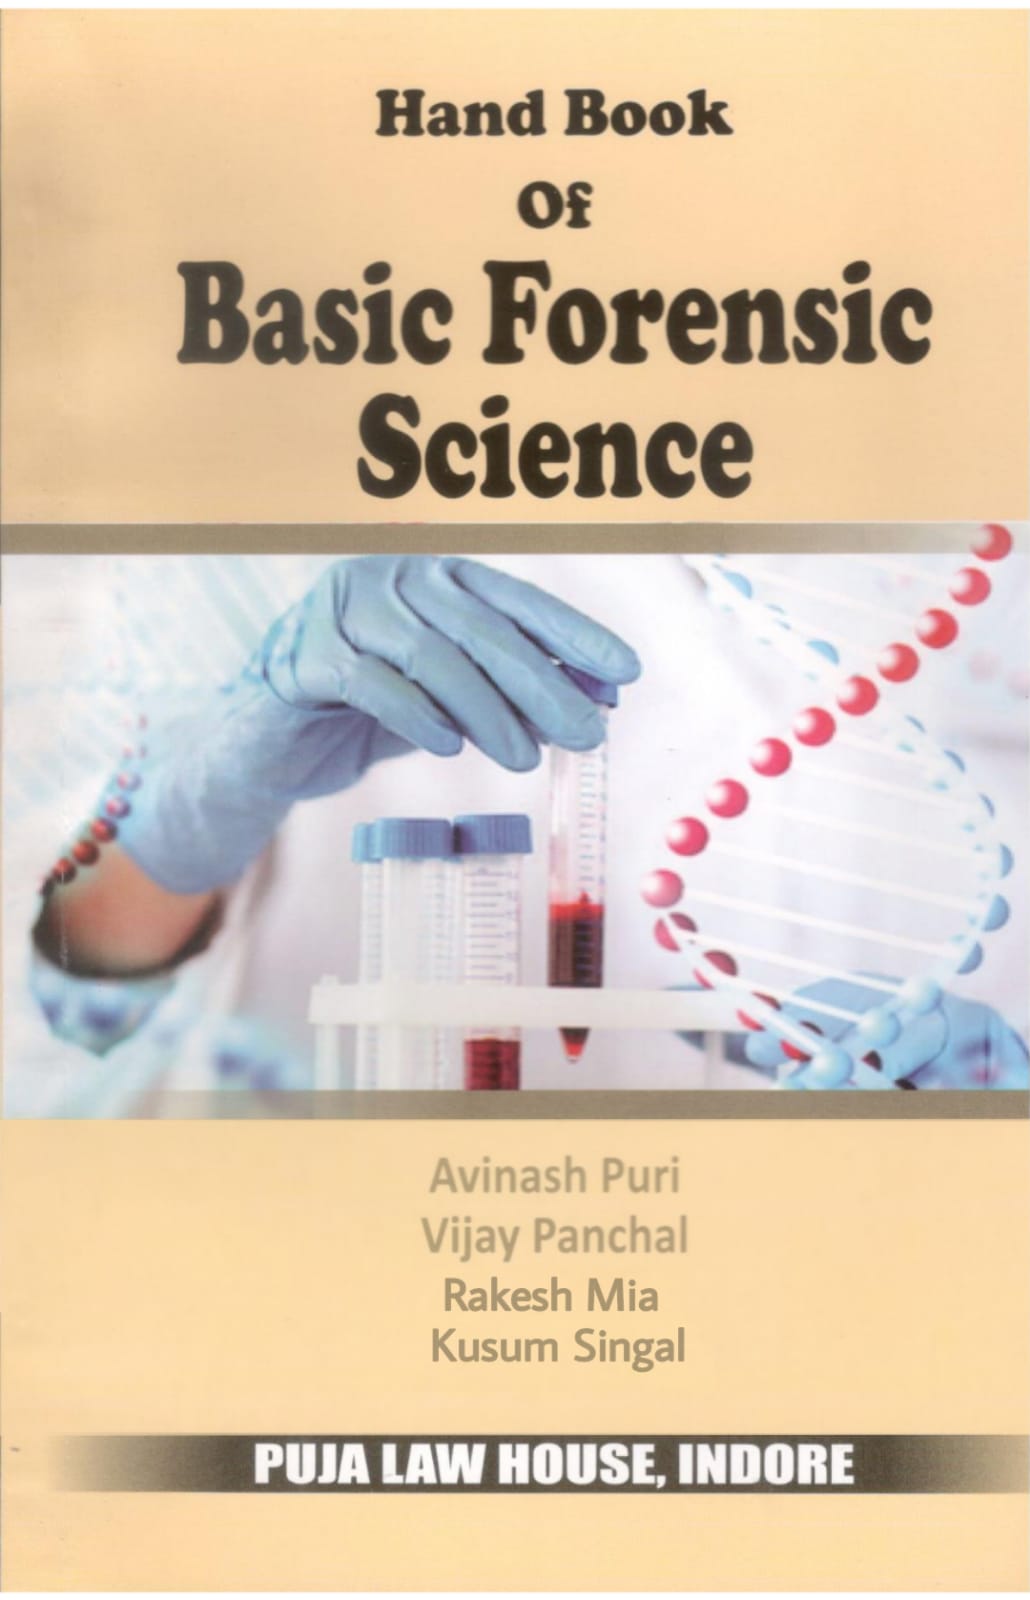  Buy Hand book of Basic Forensic Science